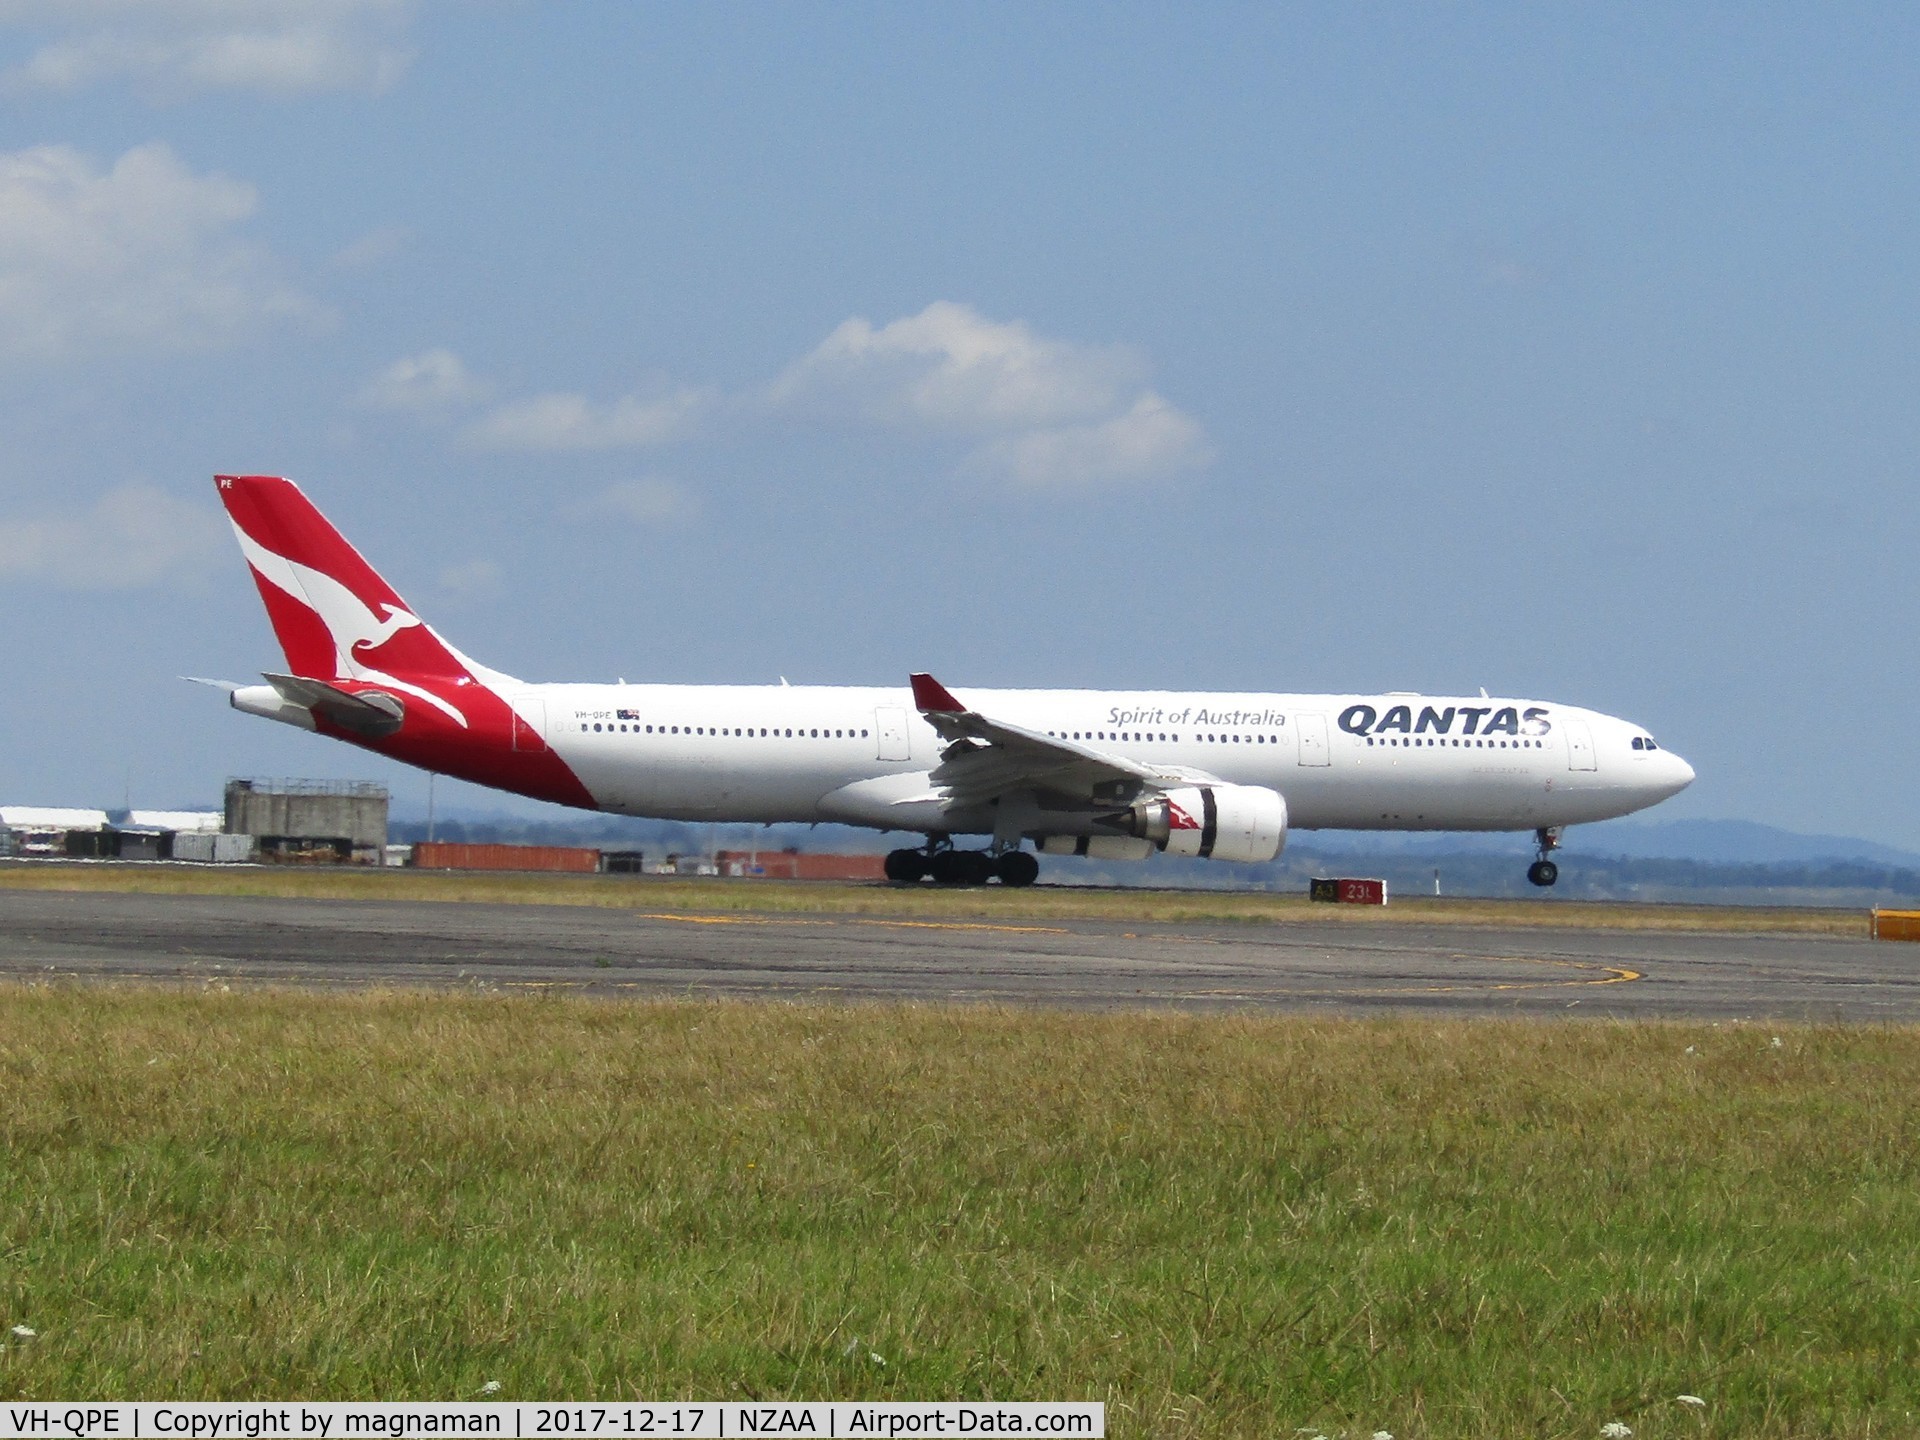 VH-QPE, 2004 Airbus A330-303 C/N 0593, slowing down